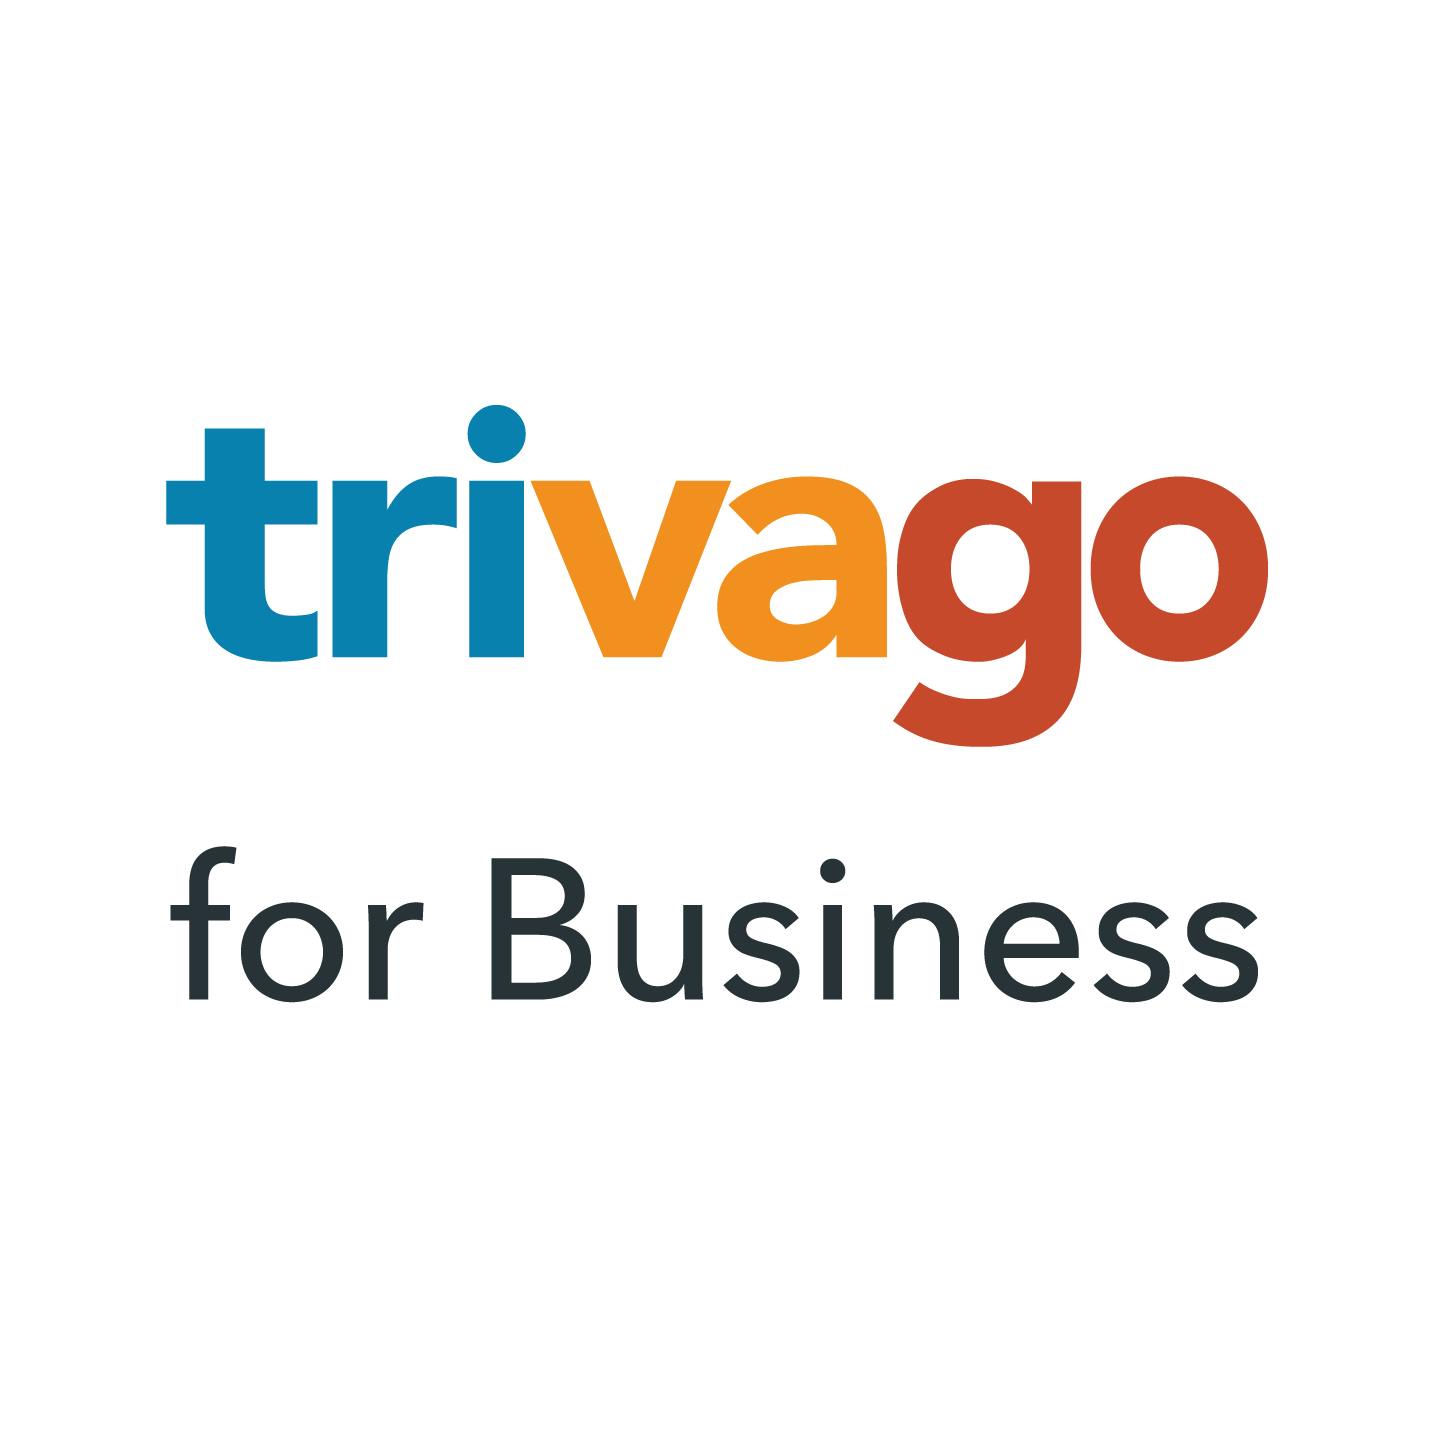 trivago for business logo - colourful letters in trivago, with For Business underneath. 